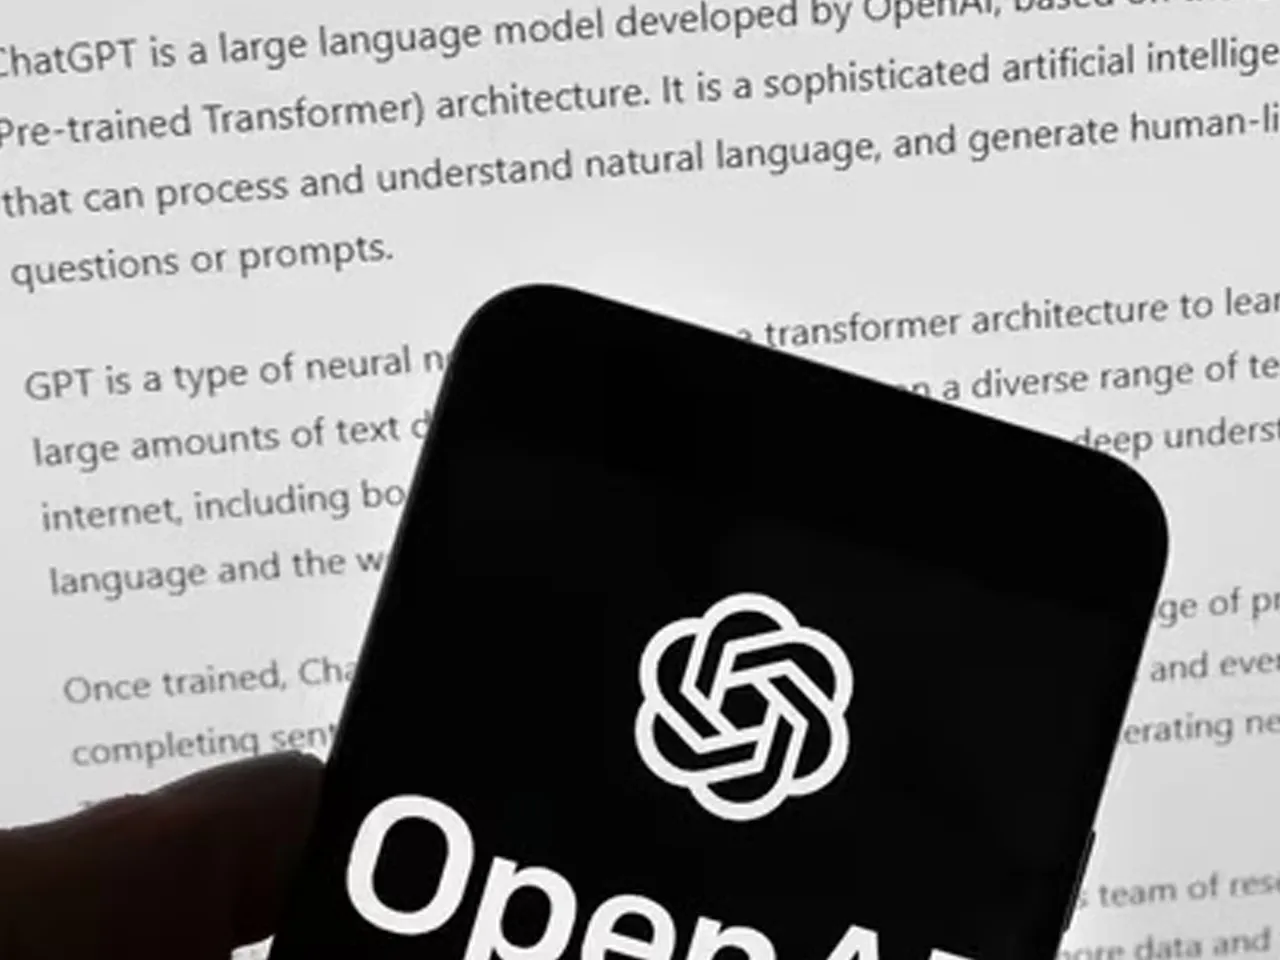 Users can now access OpenAI's ChatGPT without an account